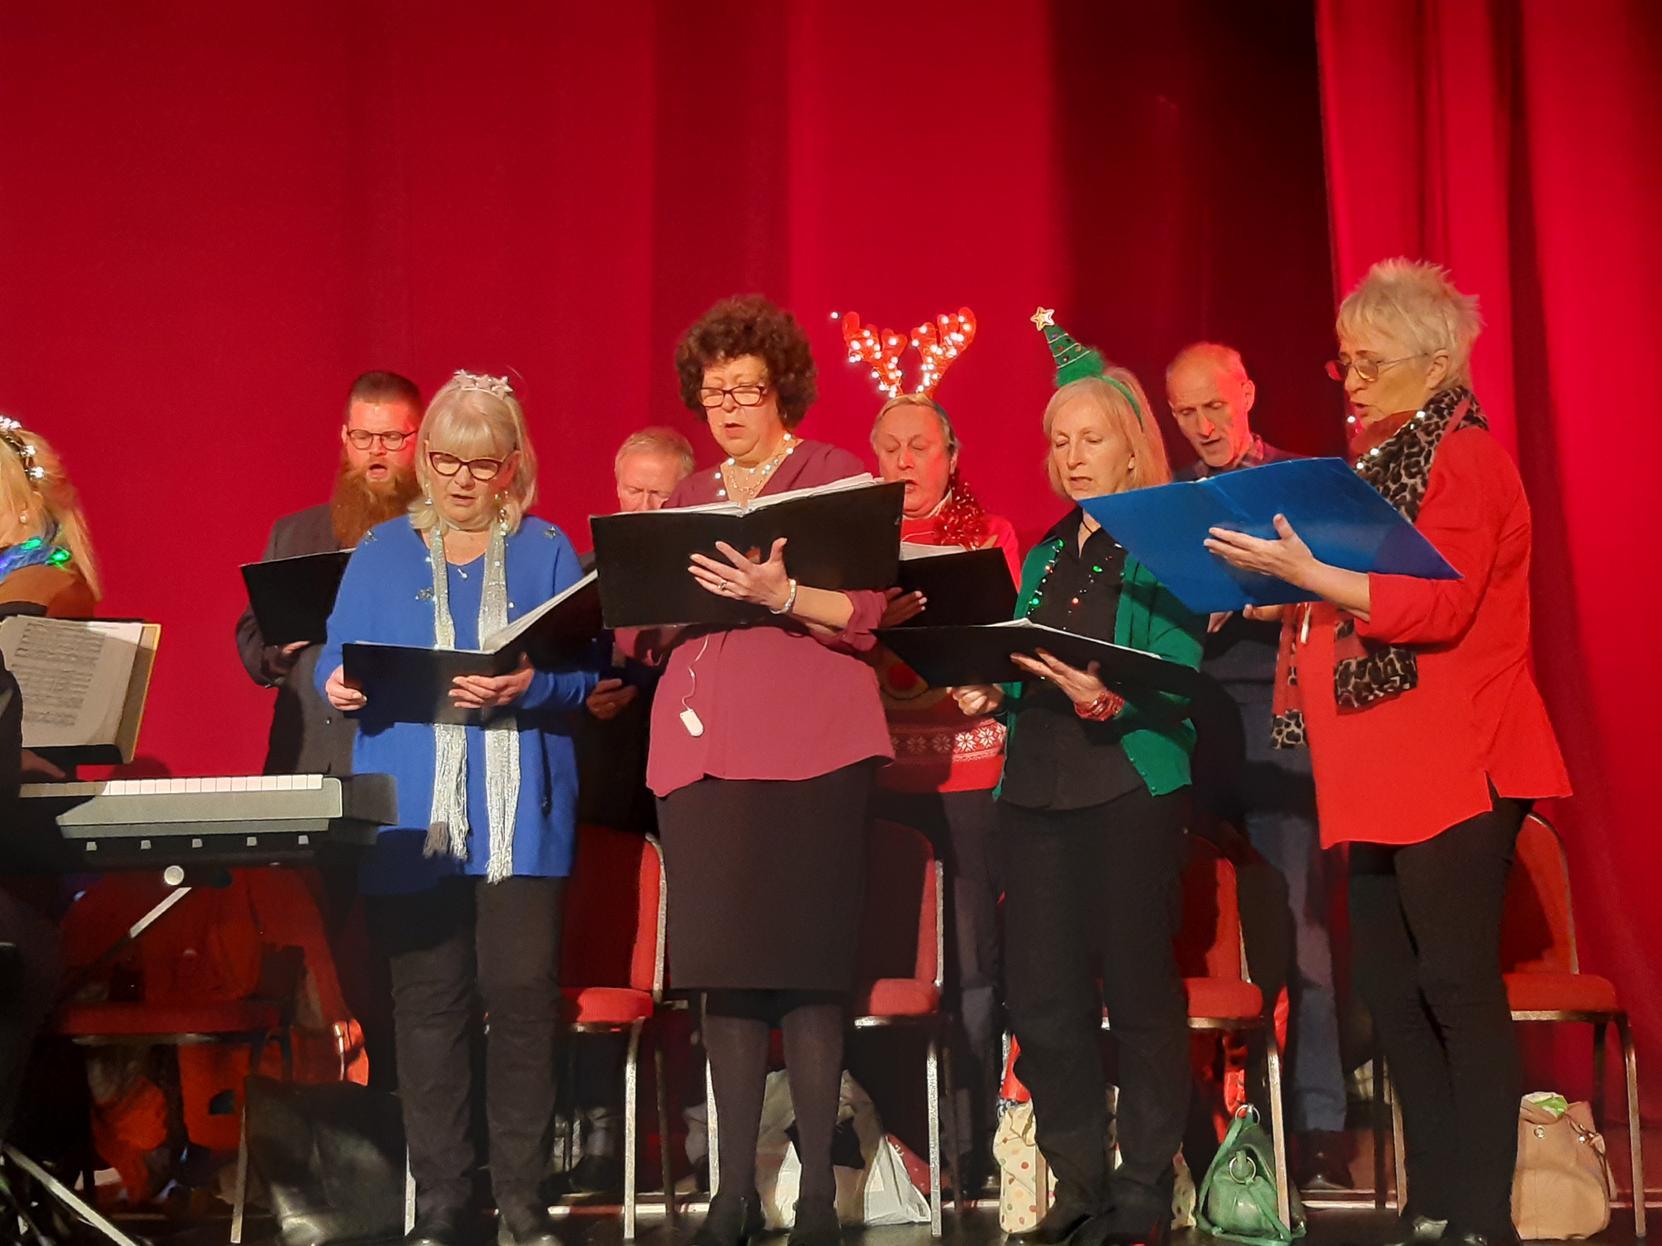 Carol singers took to the stage with soulful renditions of traditional festive songs, including the old favourite 'White Christmas'.